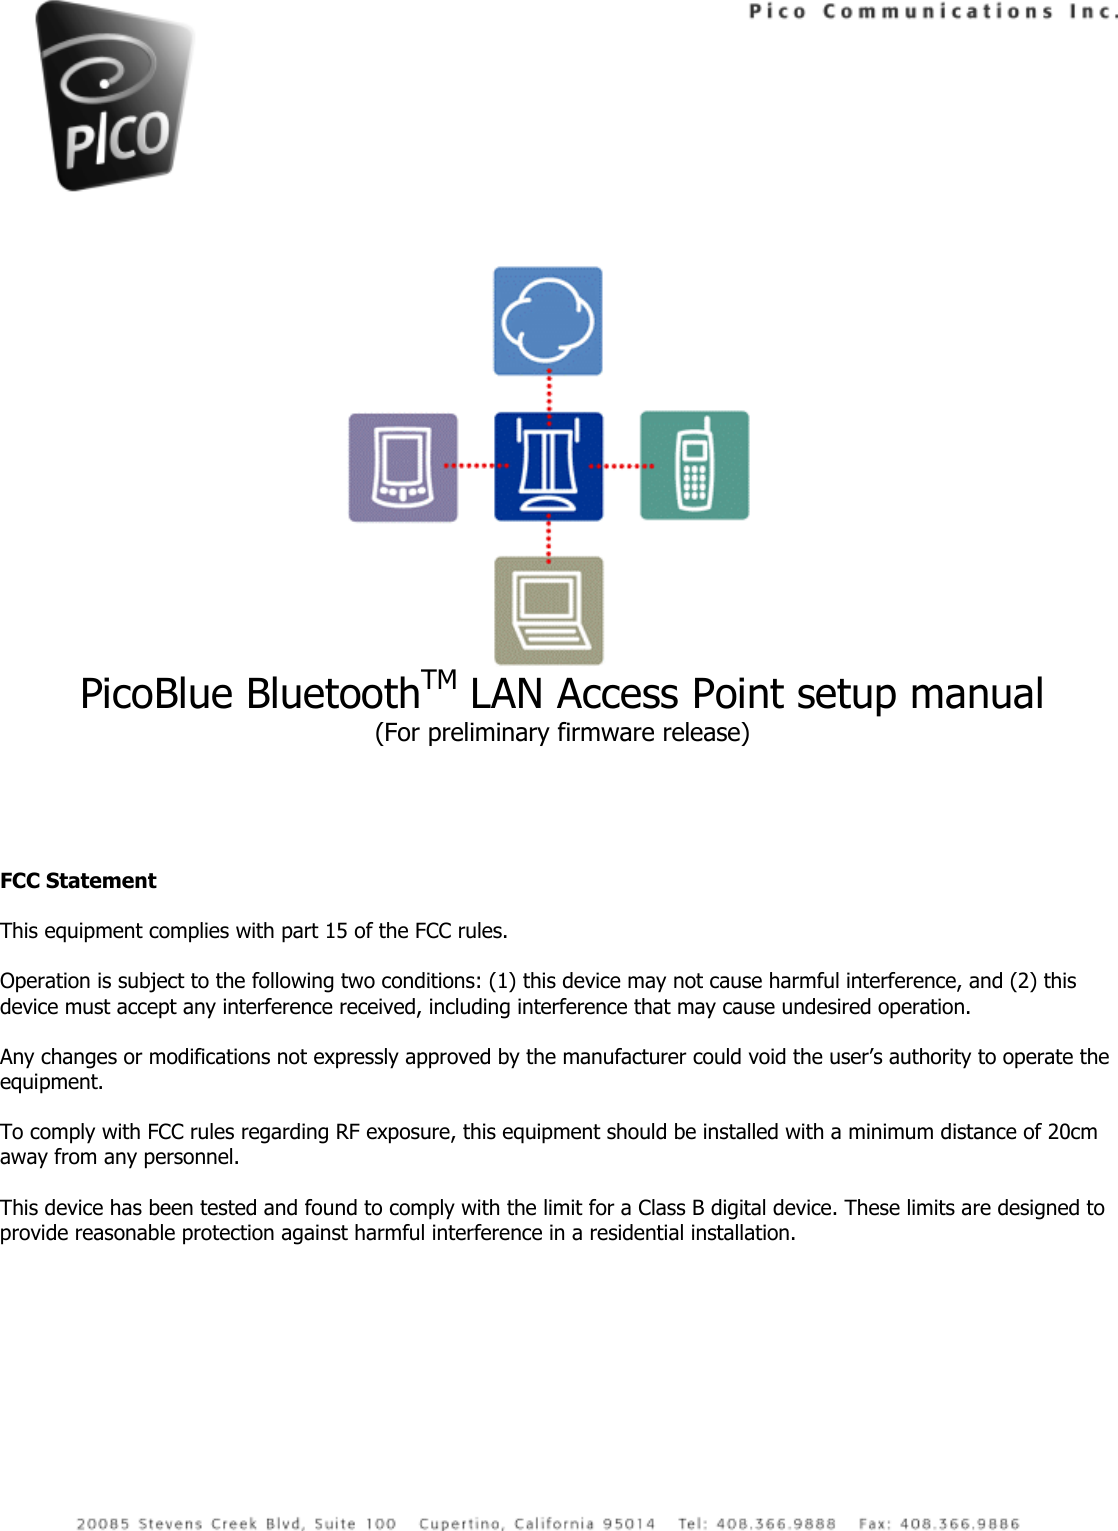   PicoBlue BluetoothTM LAN Access Point setup manual (For preliminary firmware release)     FCC Statement  This equipment complies with part 15 of the FCC rules.   Operation is subject to the following two conditions: (1) this device may not cause harmful interference, and (2) this device must accept any interference received, including interference that may cause undesired operation.  Any changes or modifications not expressly approved by the manufacturer could void the user’s authority to operate the equipment.  To comply with FCC rules regarding RF exposure, this equipment should be installed with a minimum distance of 20cm away from any personnel.  This device has been tested and found to comply with the limit for a Class B digital device. These limits are designed to provide reasonable protection against harmful interference in a residential installation.  